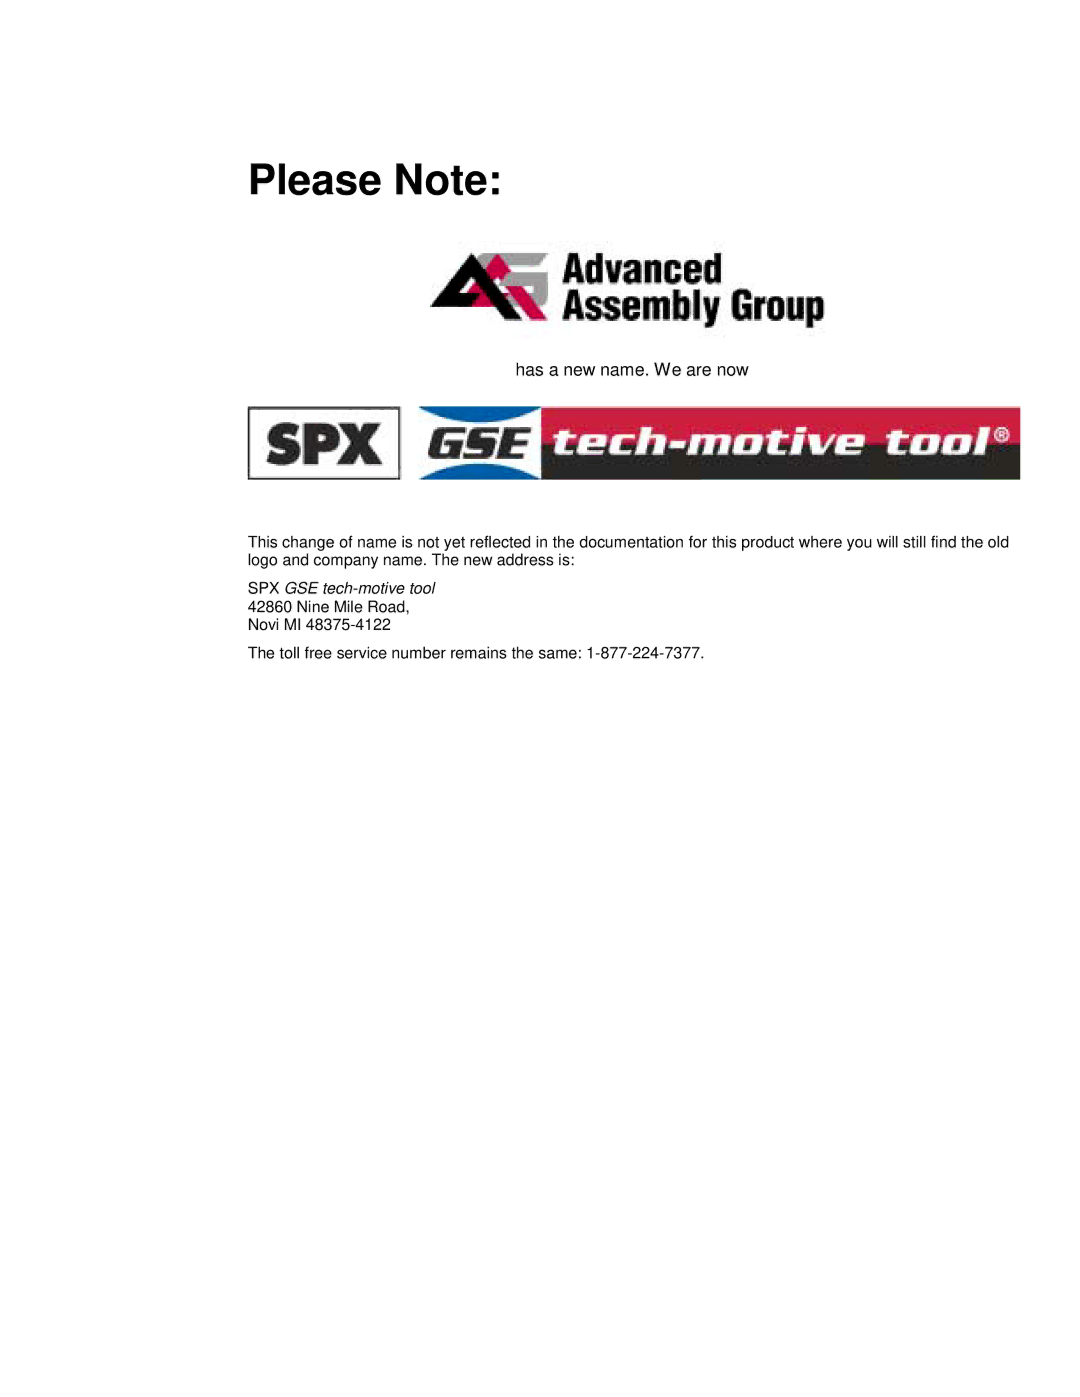 SPX Cooling Technologies CS4000 manual Please Note 